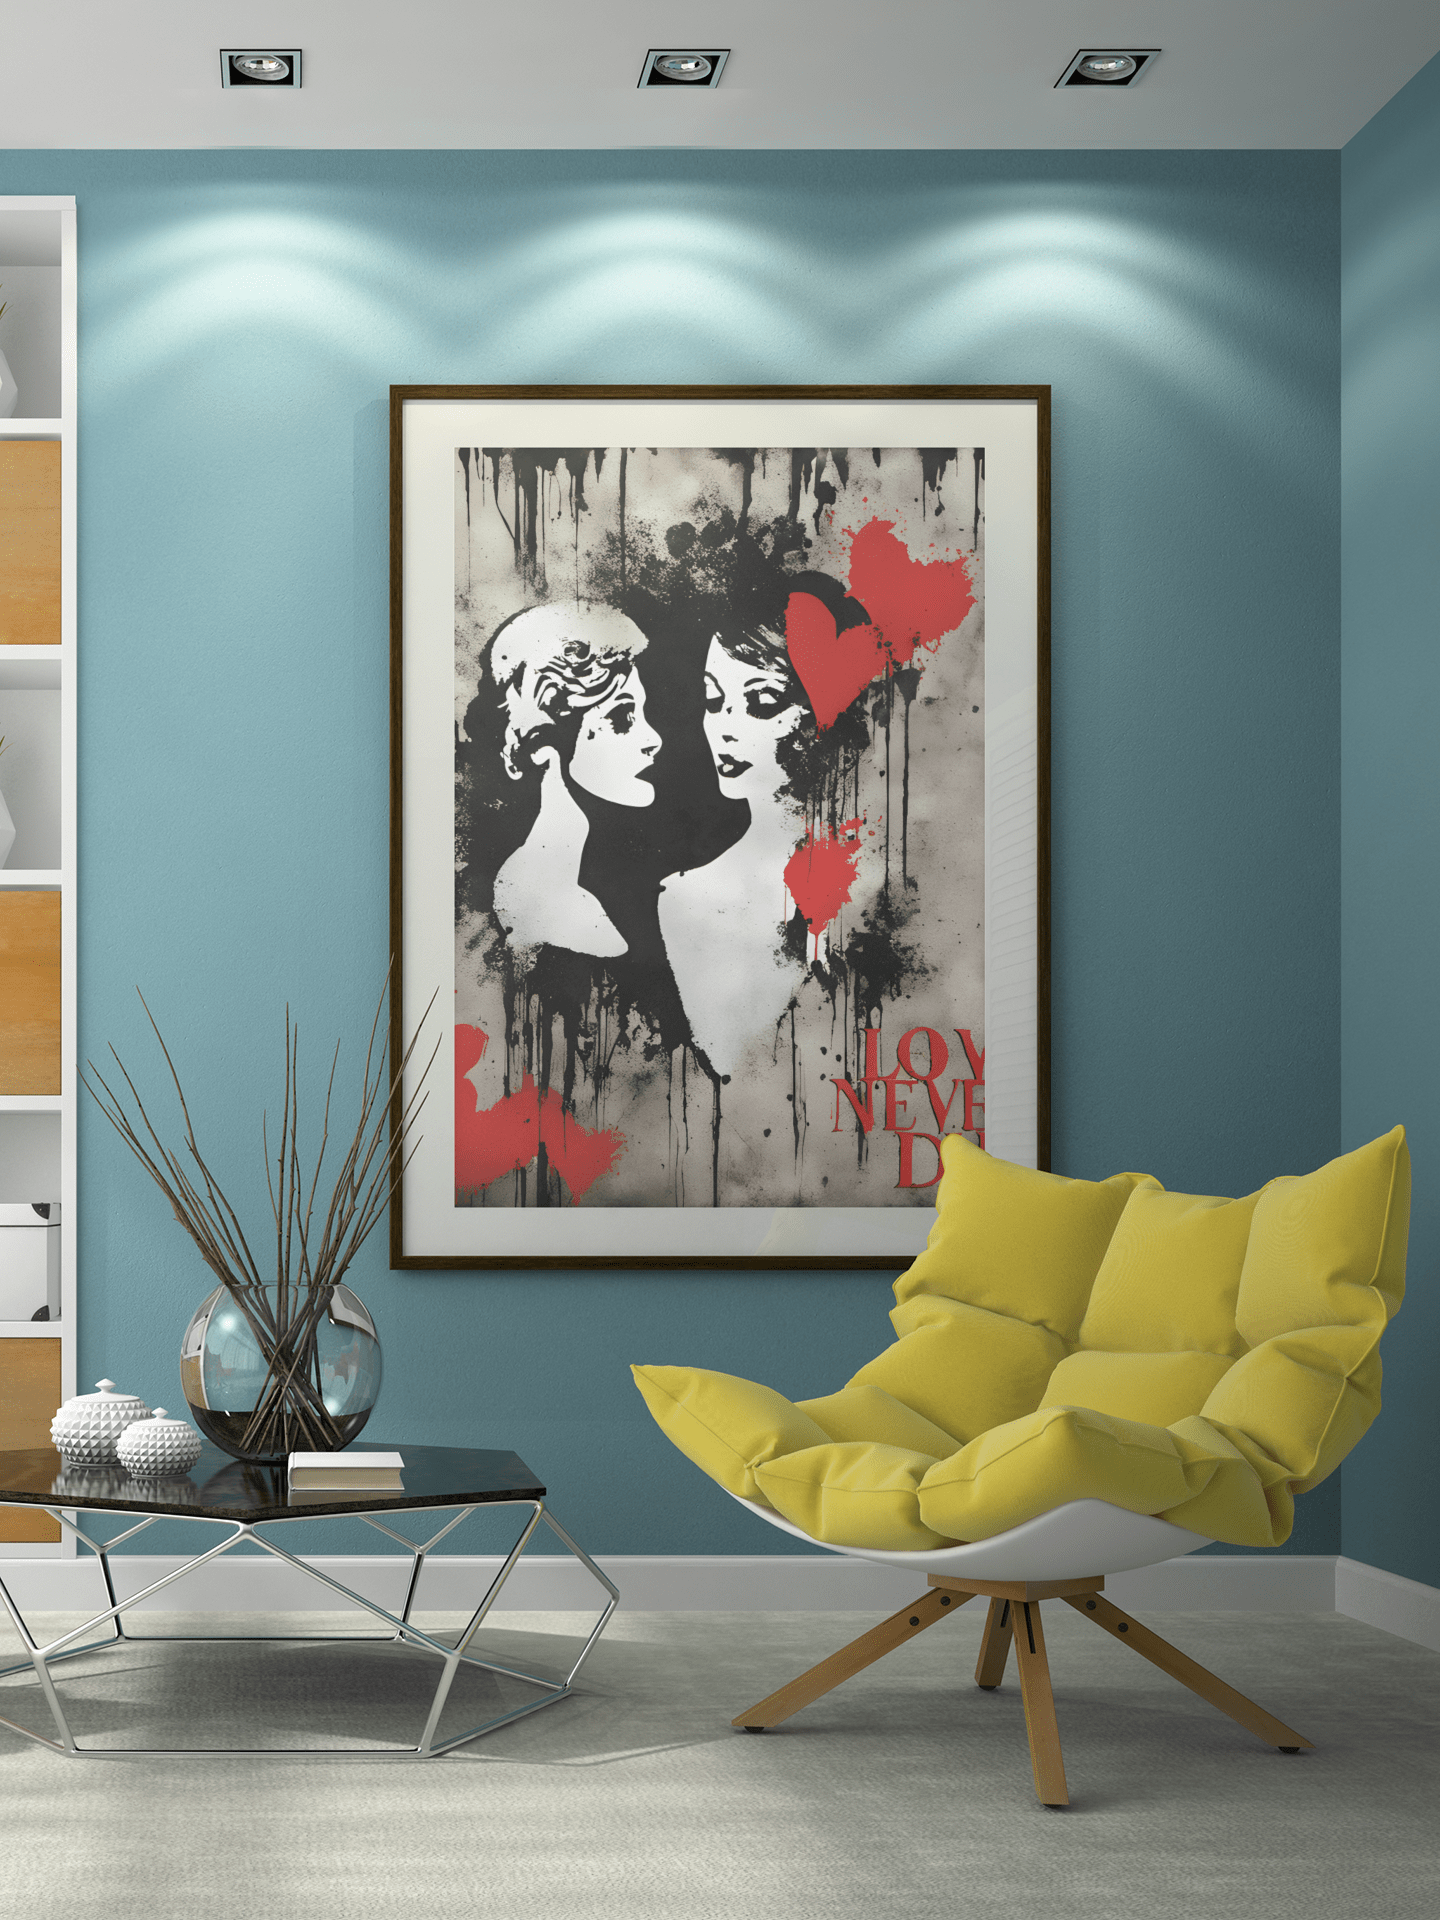 in situ Artwork from ‘Love Never Dies’ series by Aria Muralis, depicting two women’s faces intertwined in street art style, surrounded by vibrant graffiti hearts. A powerful representation of inclusive love that transcends life.